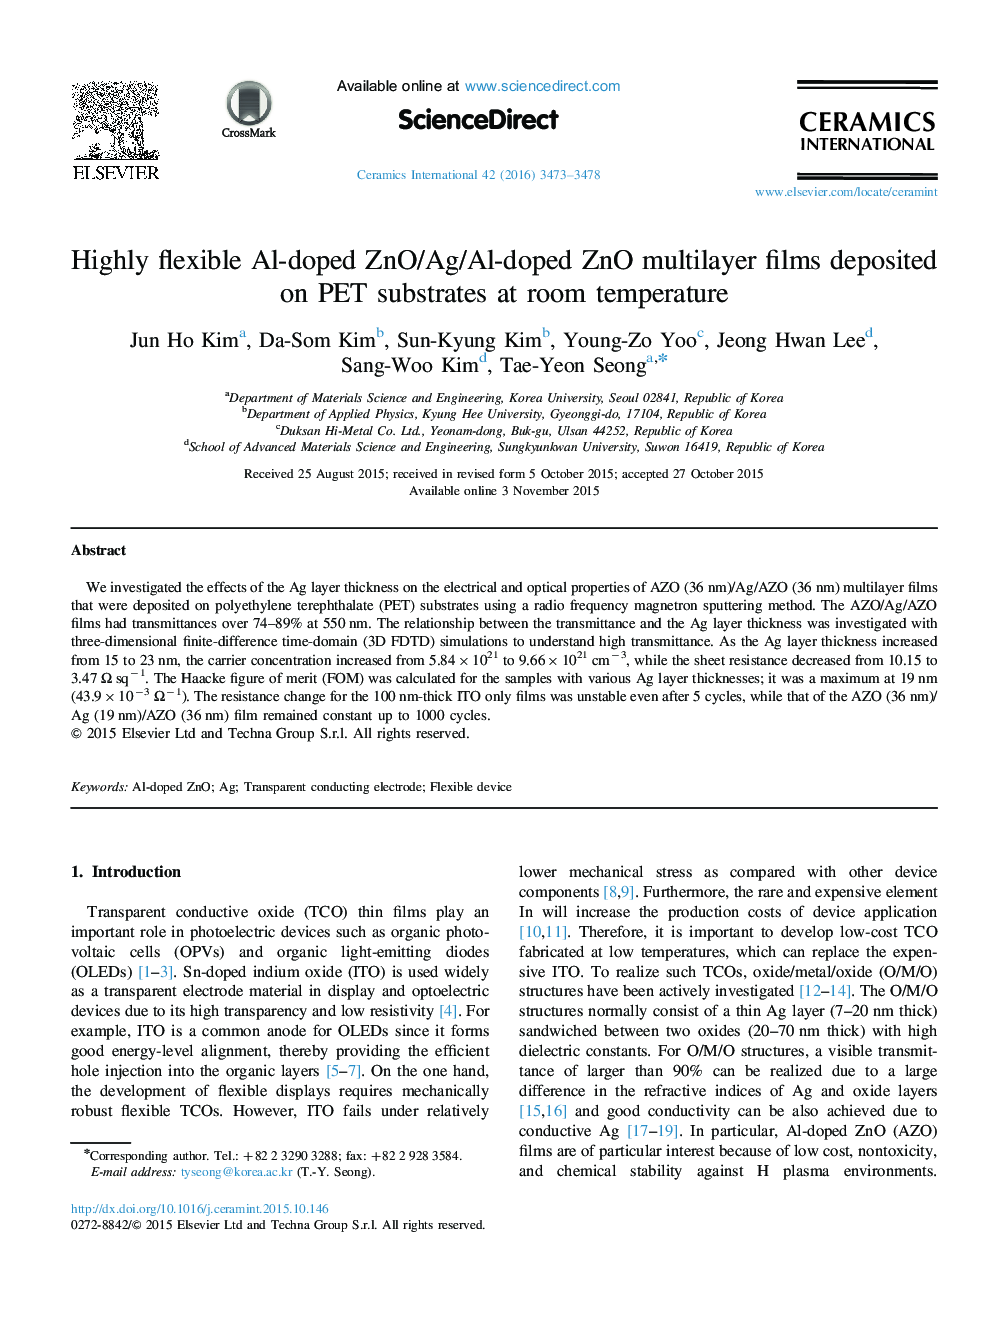 Highly flexible Al-doped ZnO/Ag/Al-doped ZnO multilayer films deposited on PET substrates at room temperature